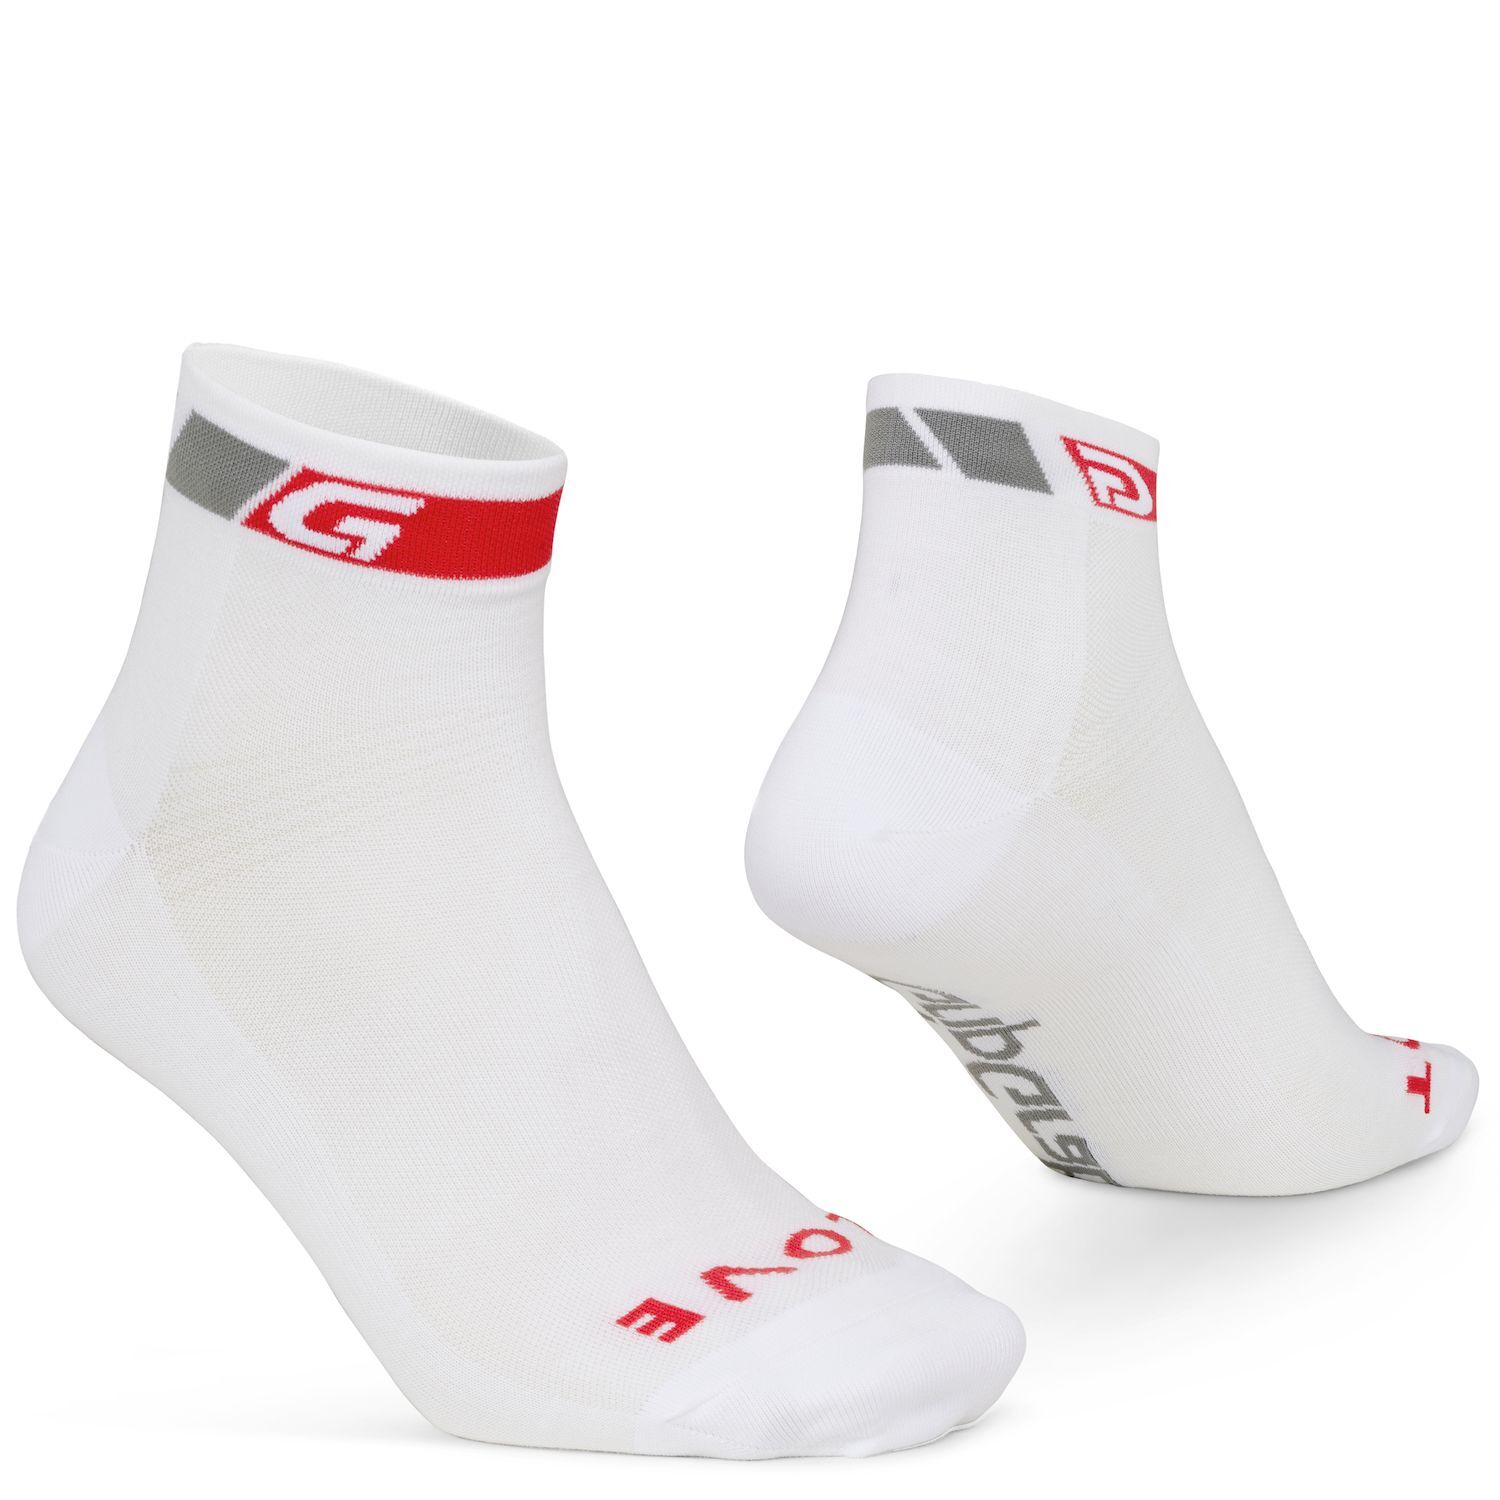 Grip Grab Classic Low Cut - Calcetines ciclismo